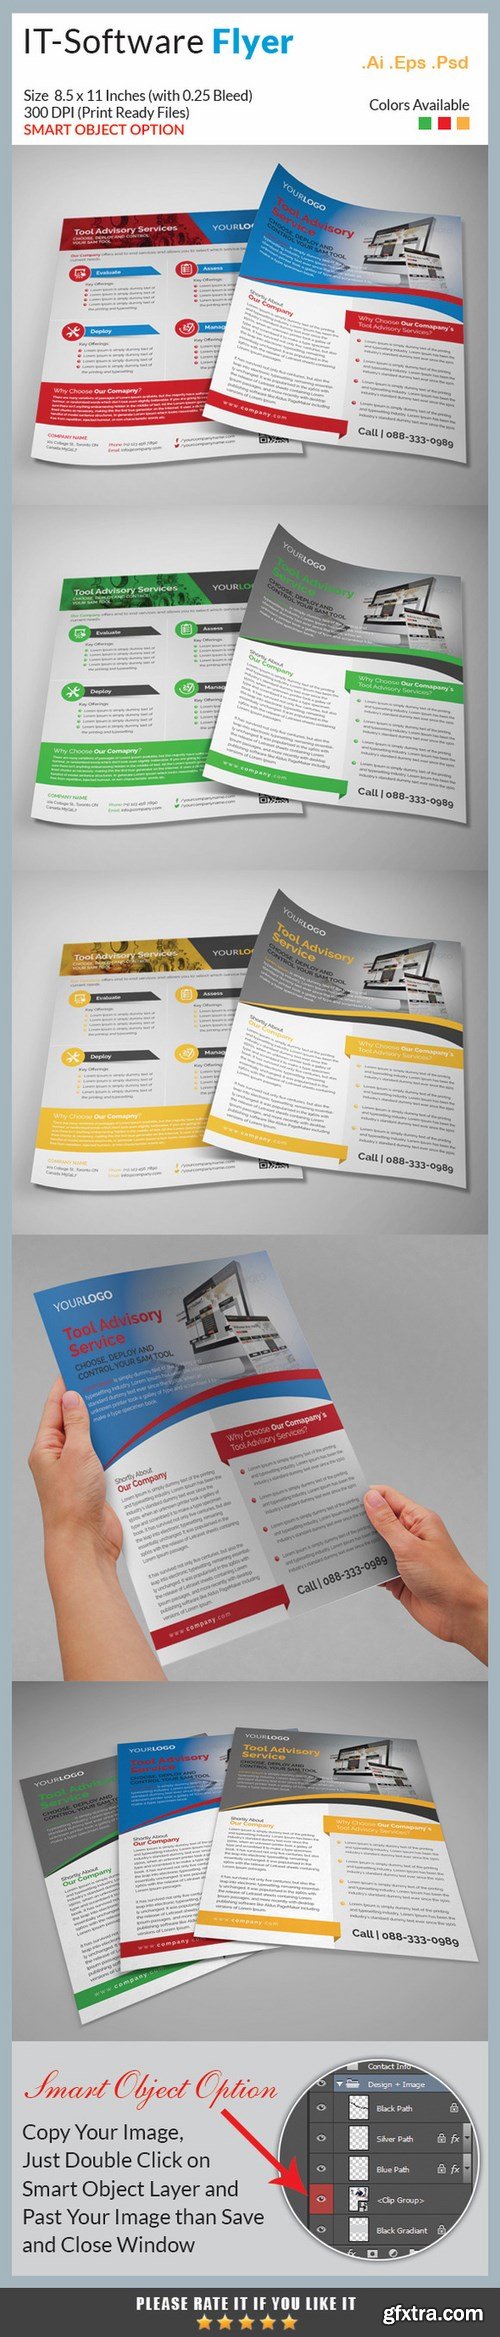 CM - IT and Software Flyers 615669